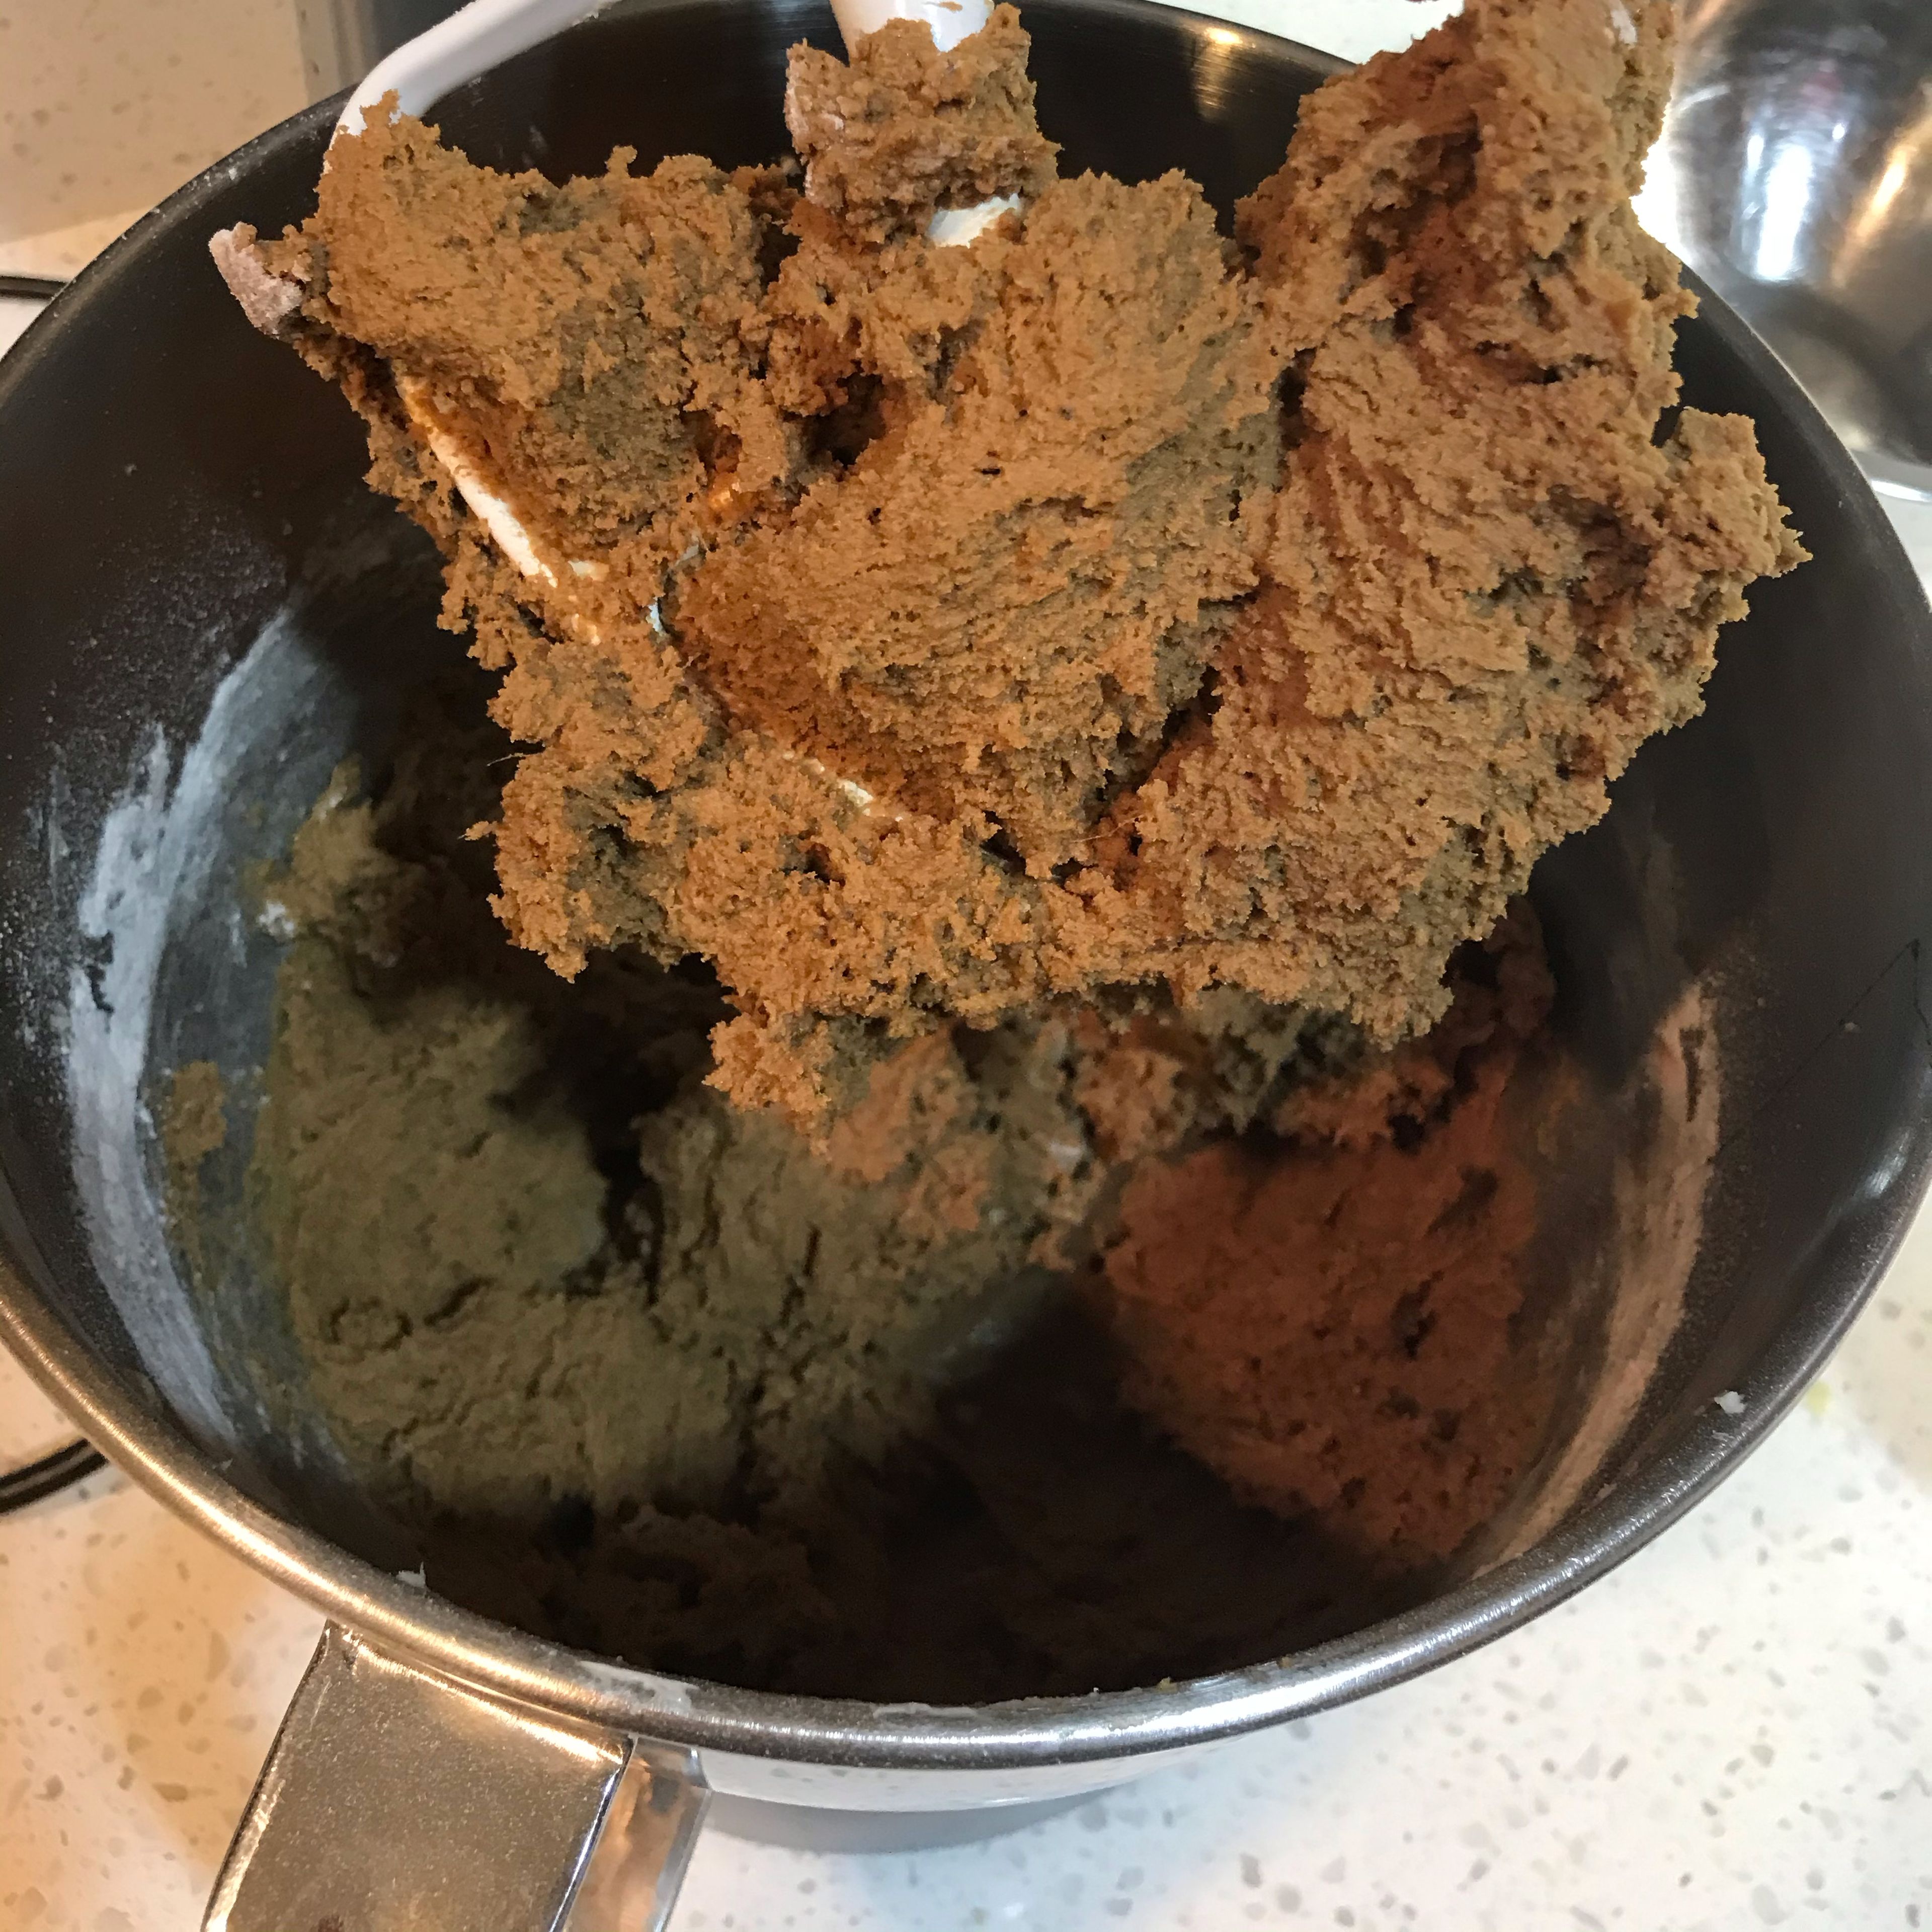 Add the flour mixture and mix on low speed until the cookie dough is well combined, no dry spots. Scrape down the sides of the bowl to combine thoroughly without over mixing.